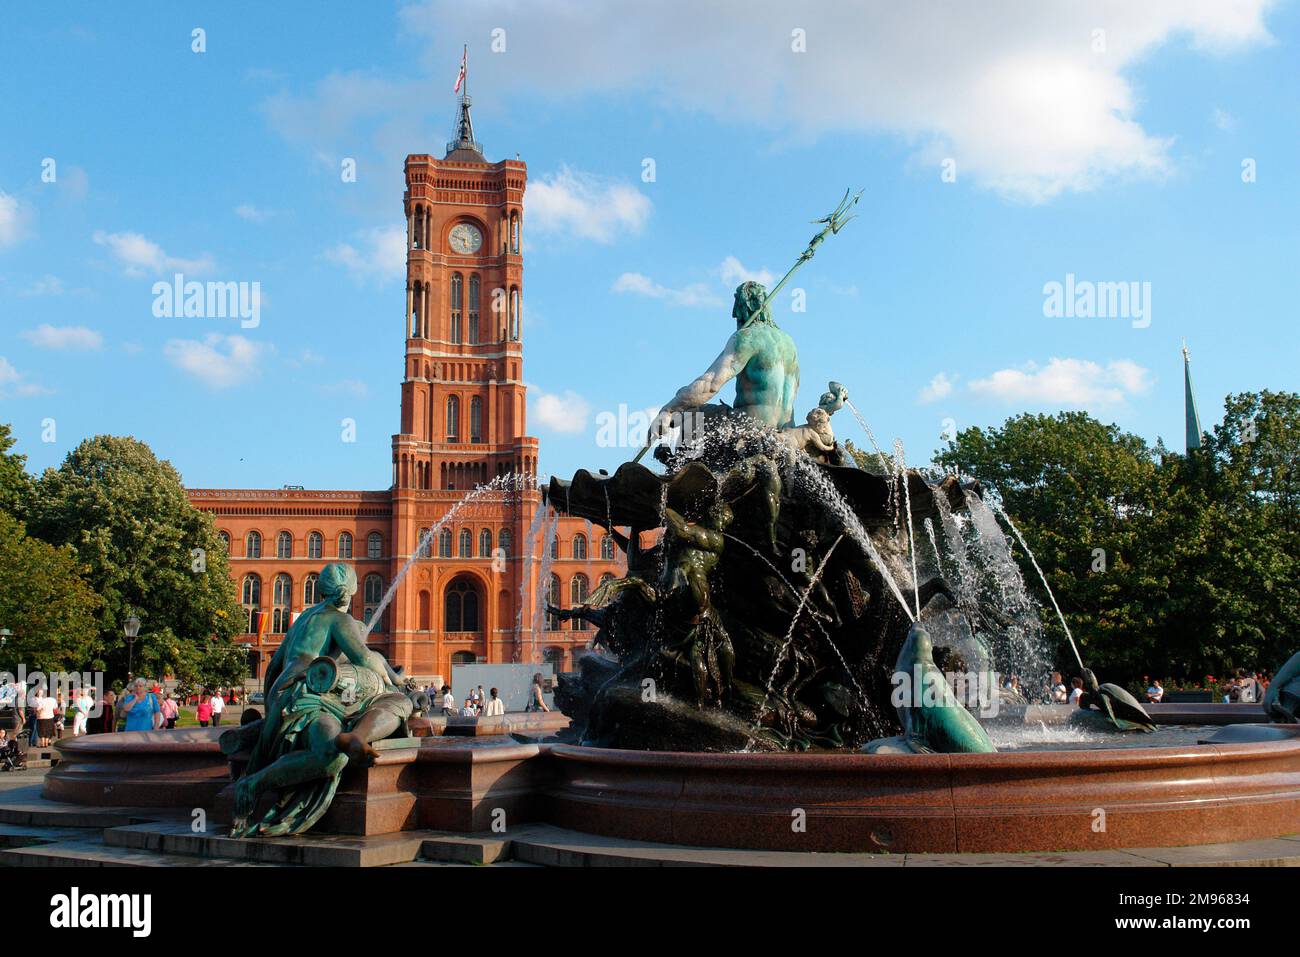 View of the Red Town Hall (Rotes Rathaus) in Berlin, Germany, with the Neptune fountain in the foreground.  It was built between 1861 and 1869 in north Italian high renaissance style.  During the Cold War it was the town hall for East Berlin; from October 1991 it became the official administration centre for unified Berlin. Stock Photo